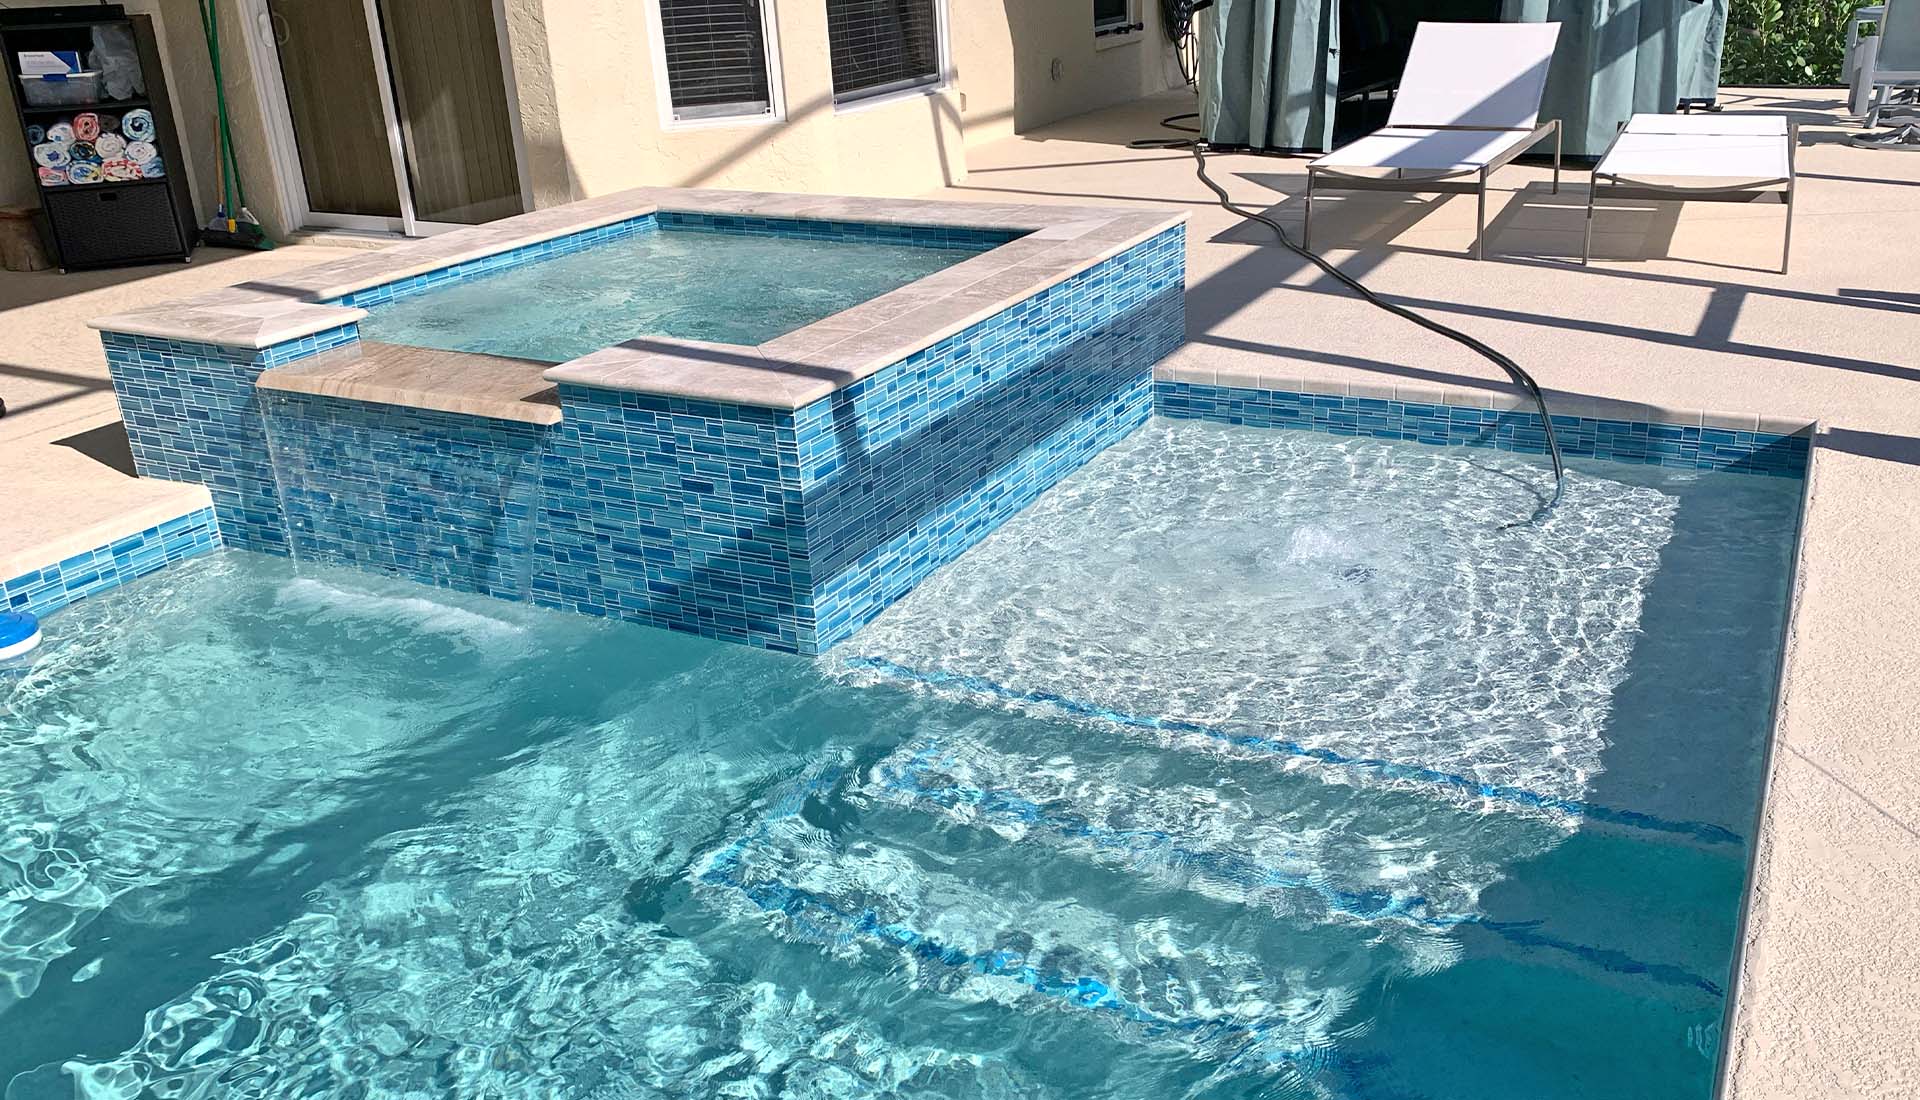 Glass tile spa and sunshelf by Pool and Deck Concepts, Naples, FL